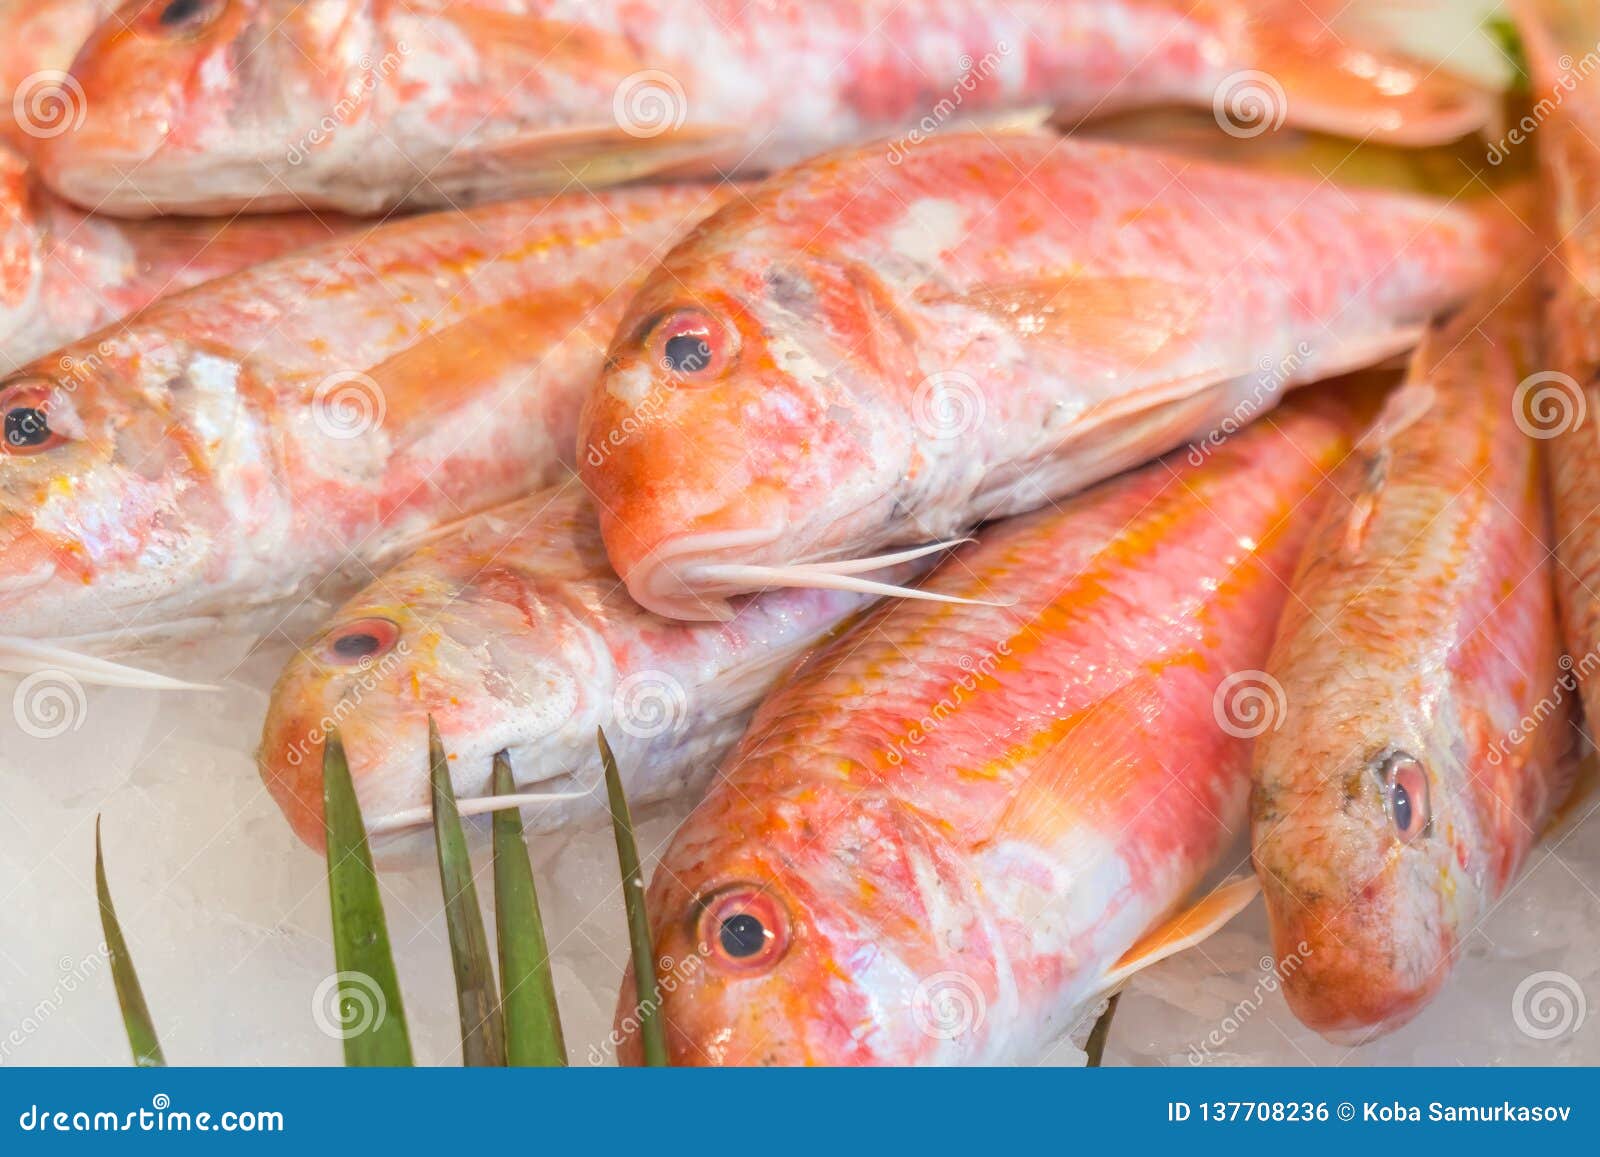 Red Mullet Fish Sale Stock Images Download 412 Royalty